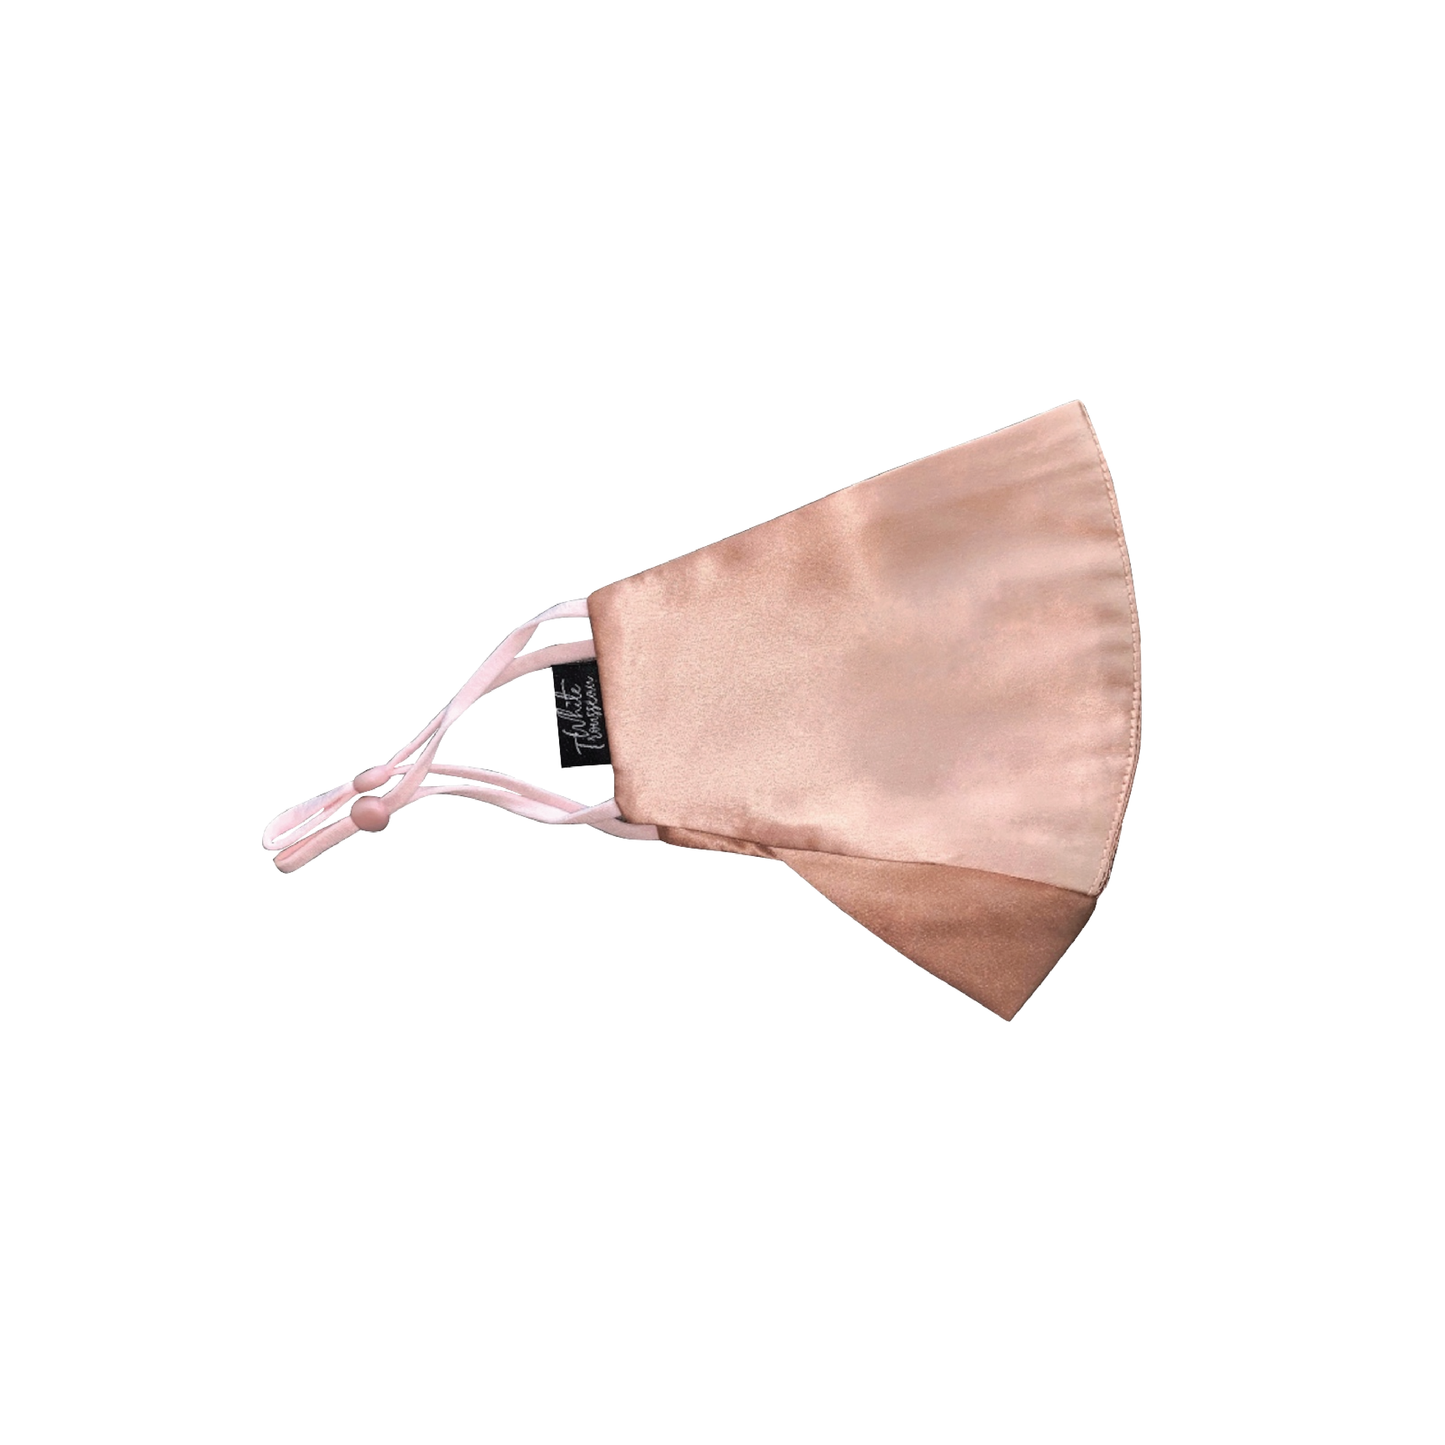 This pink Mulberry Silk Mask is high quality, fashionable and breathable. Silk also does not irritate the skin or increase local humidity around the face beneath it, making it suitable for prolonged wear, and avoiding accidental stimulation of face touching. Say goodbye to Maskne! Get the best mulberry silk mask in Singapore.